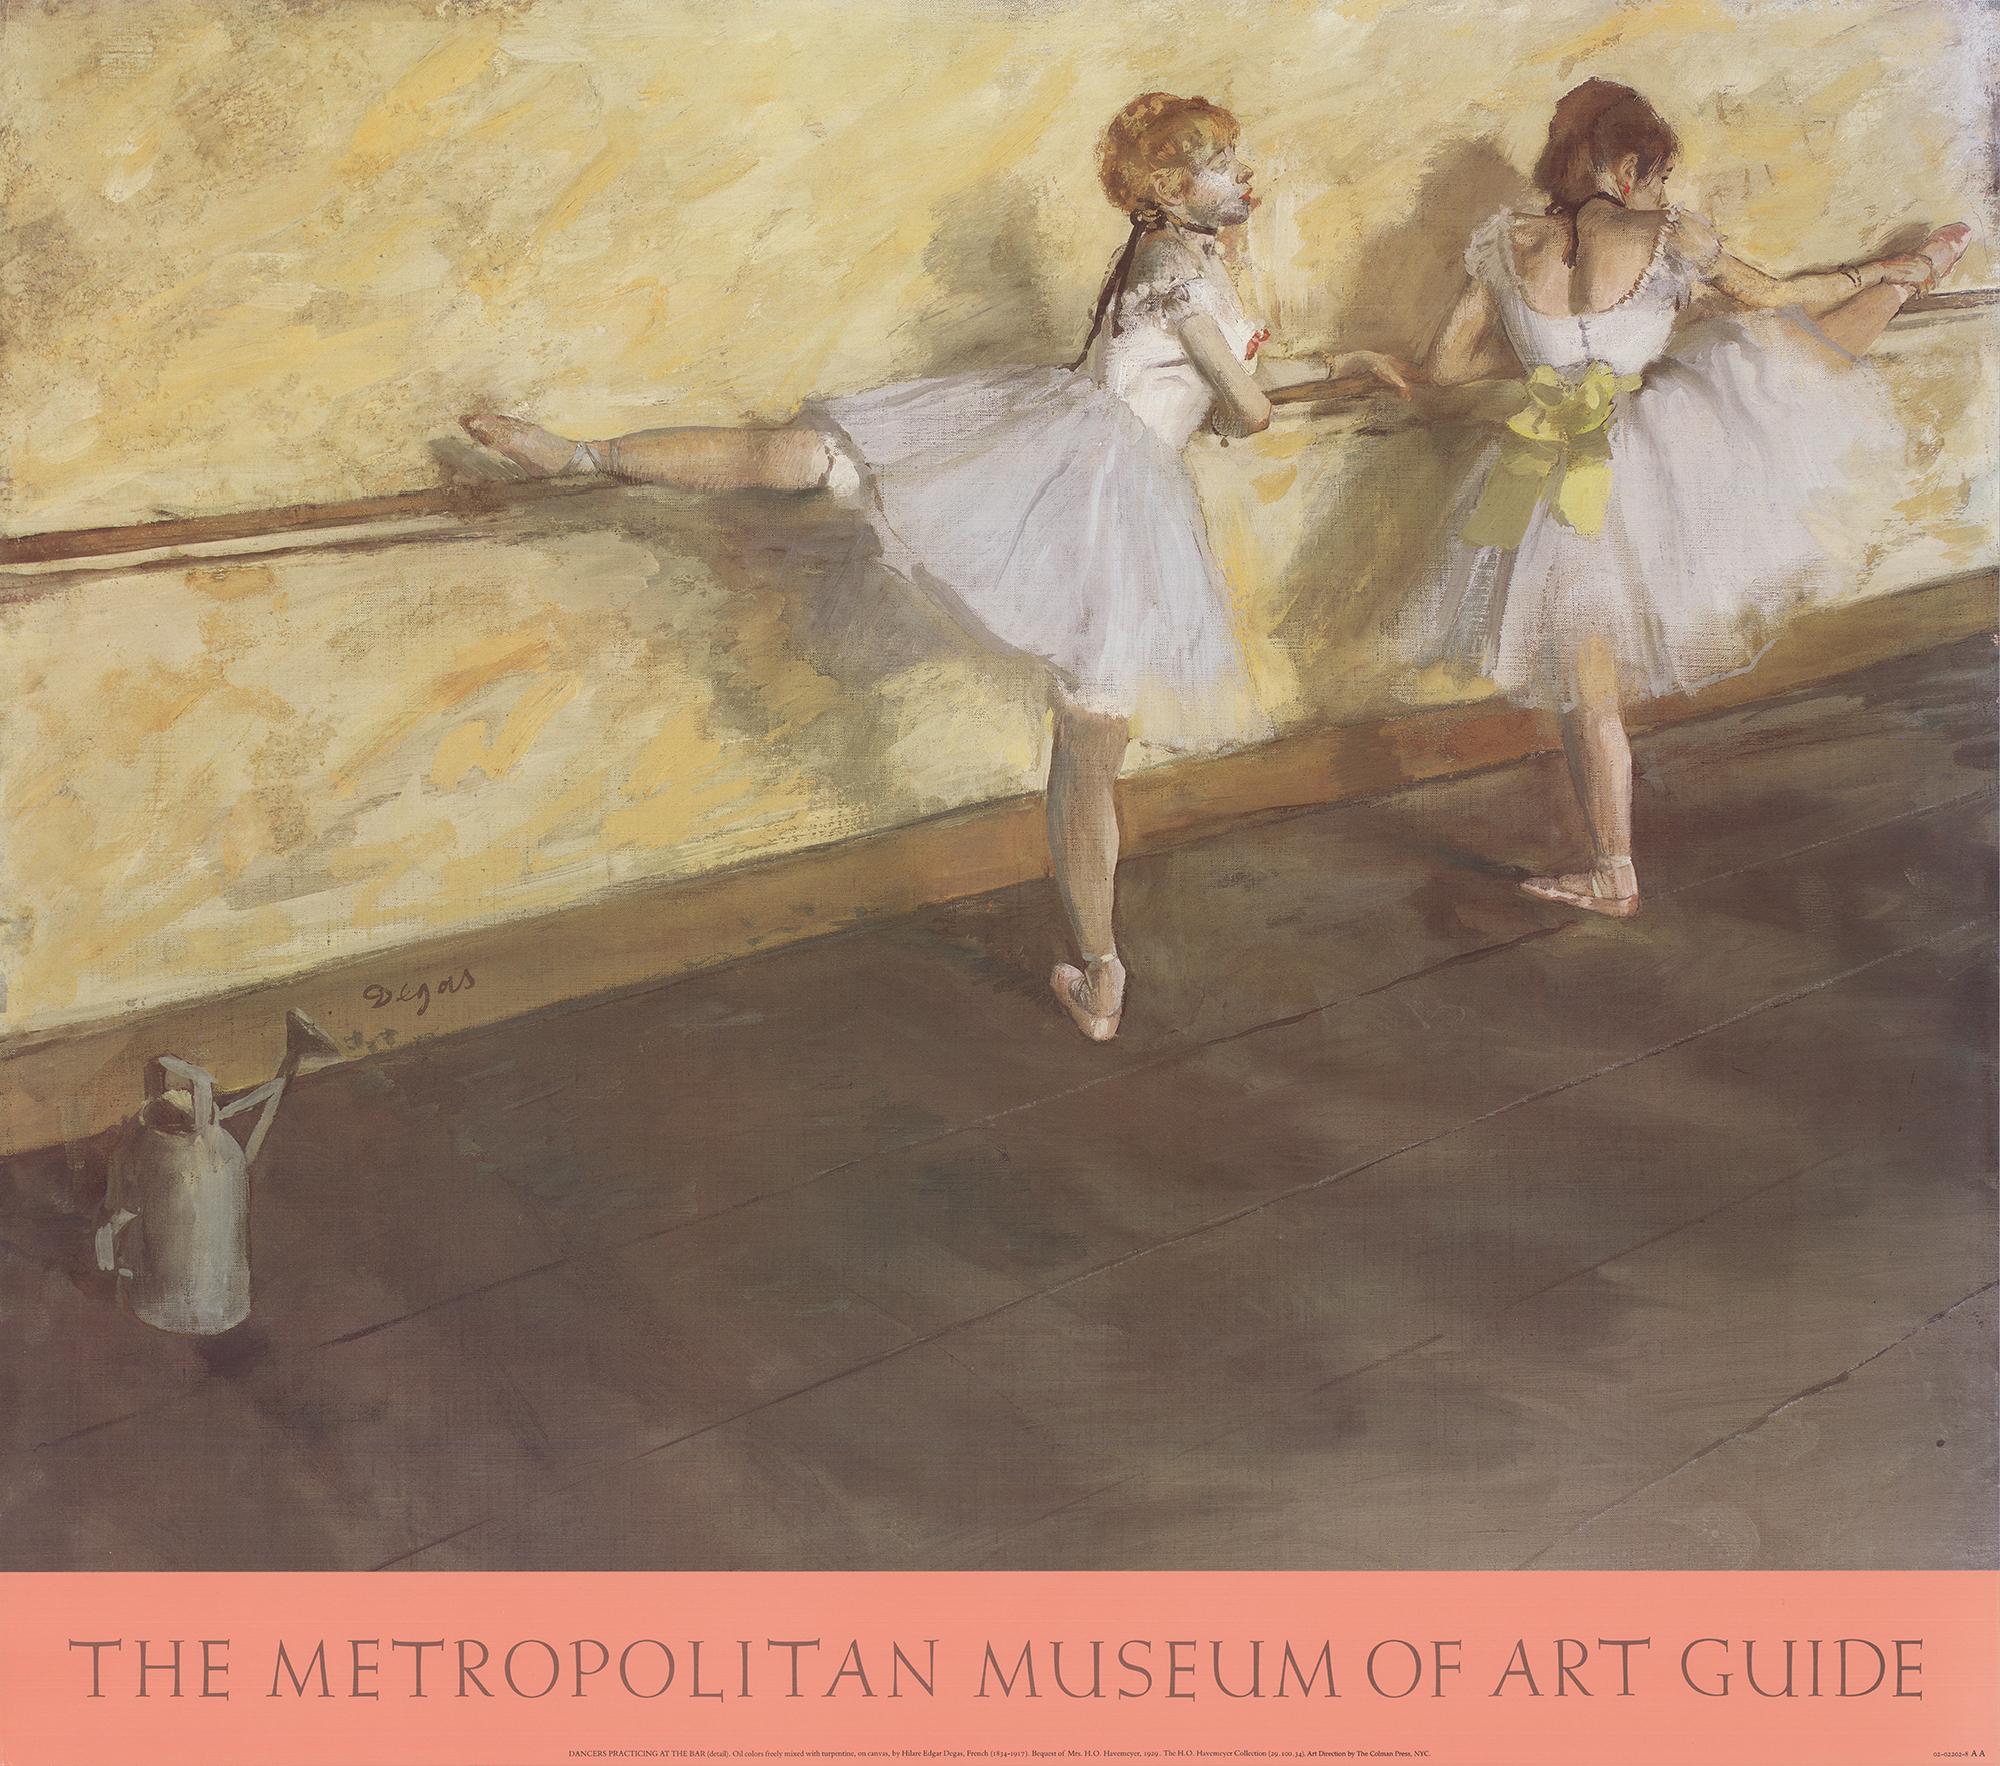 Exhibition Poster of Dancers Practicing at the Bar 30" x 34" poster Impression - Print by after Edgar Degas 